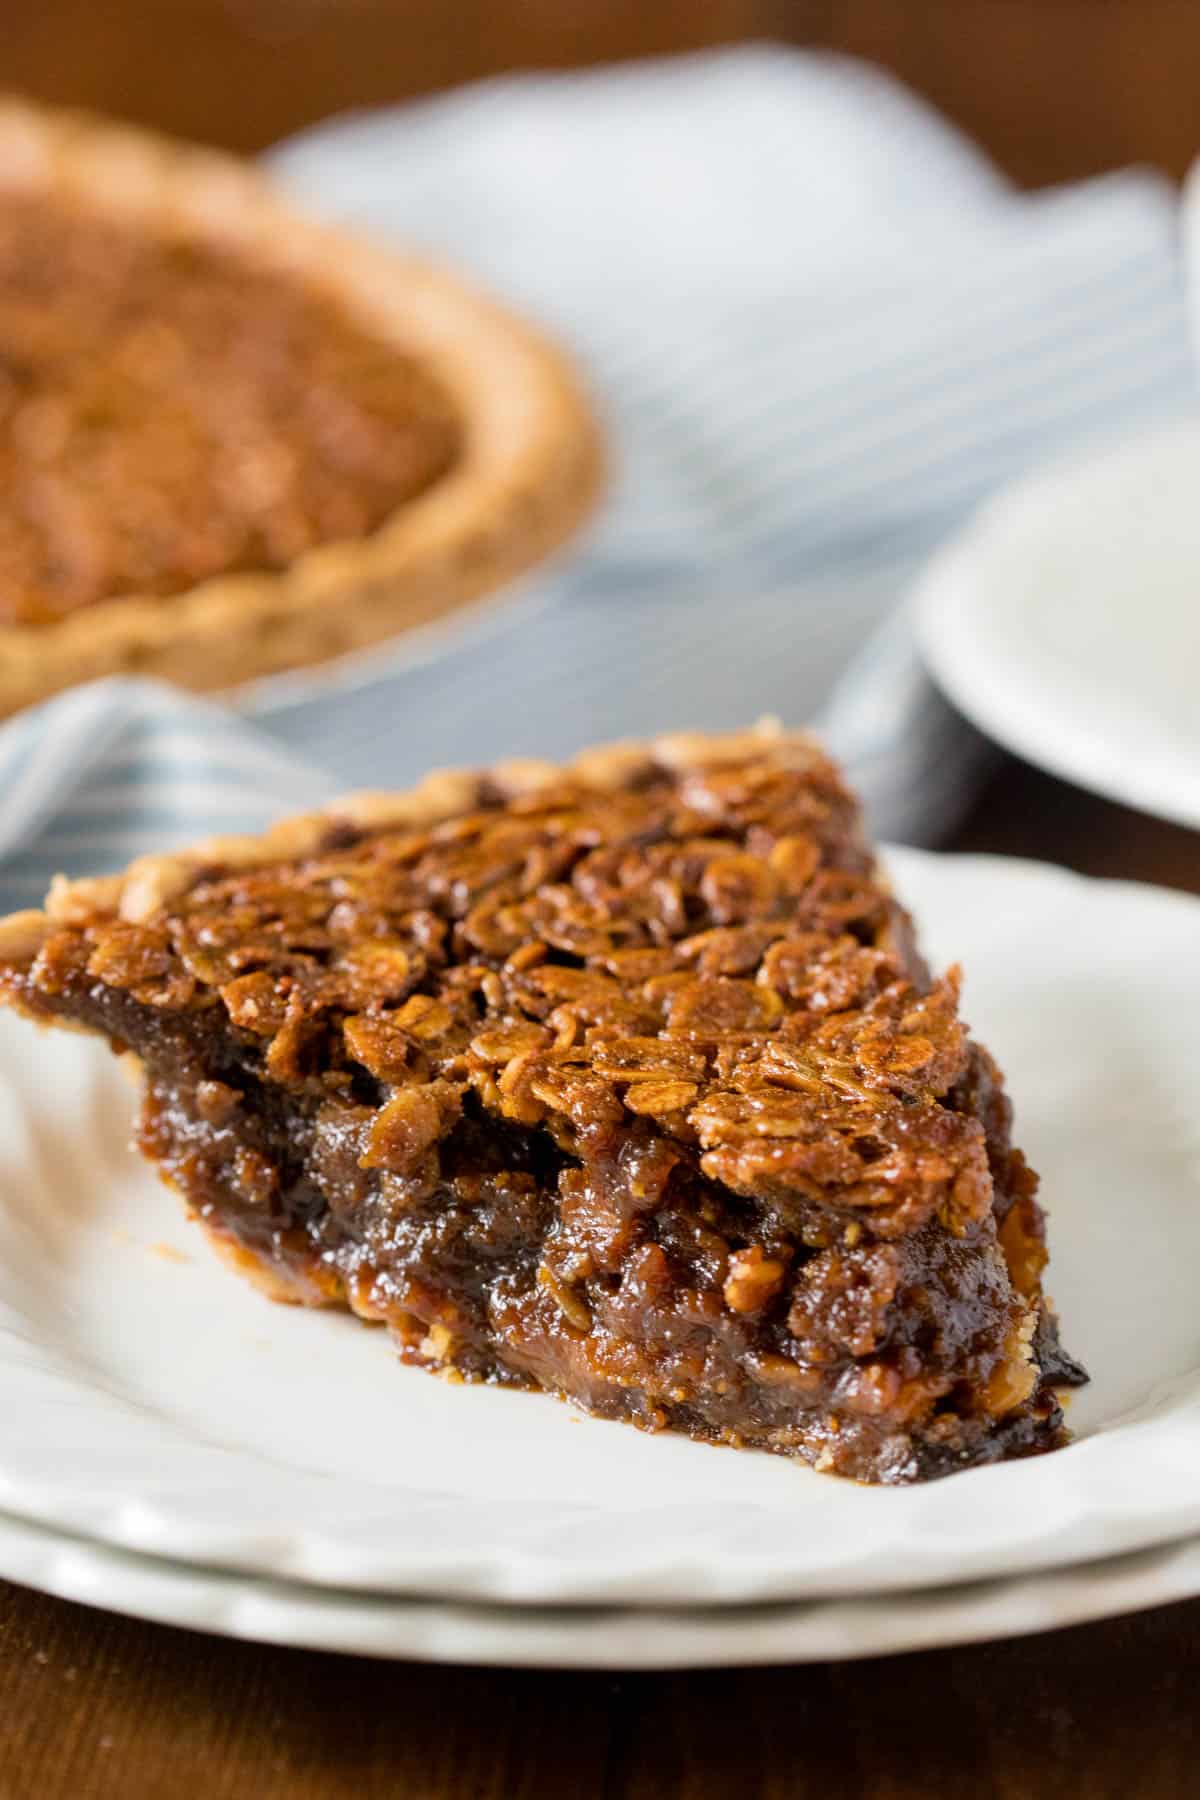 Oatmeal Pie - Old-fashioned dessert alert! A sweet, decadent pie topped with crunchy oats.